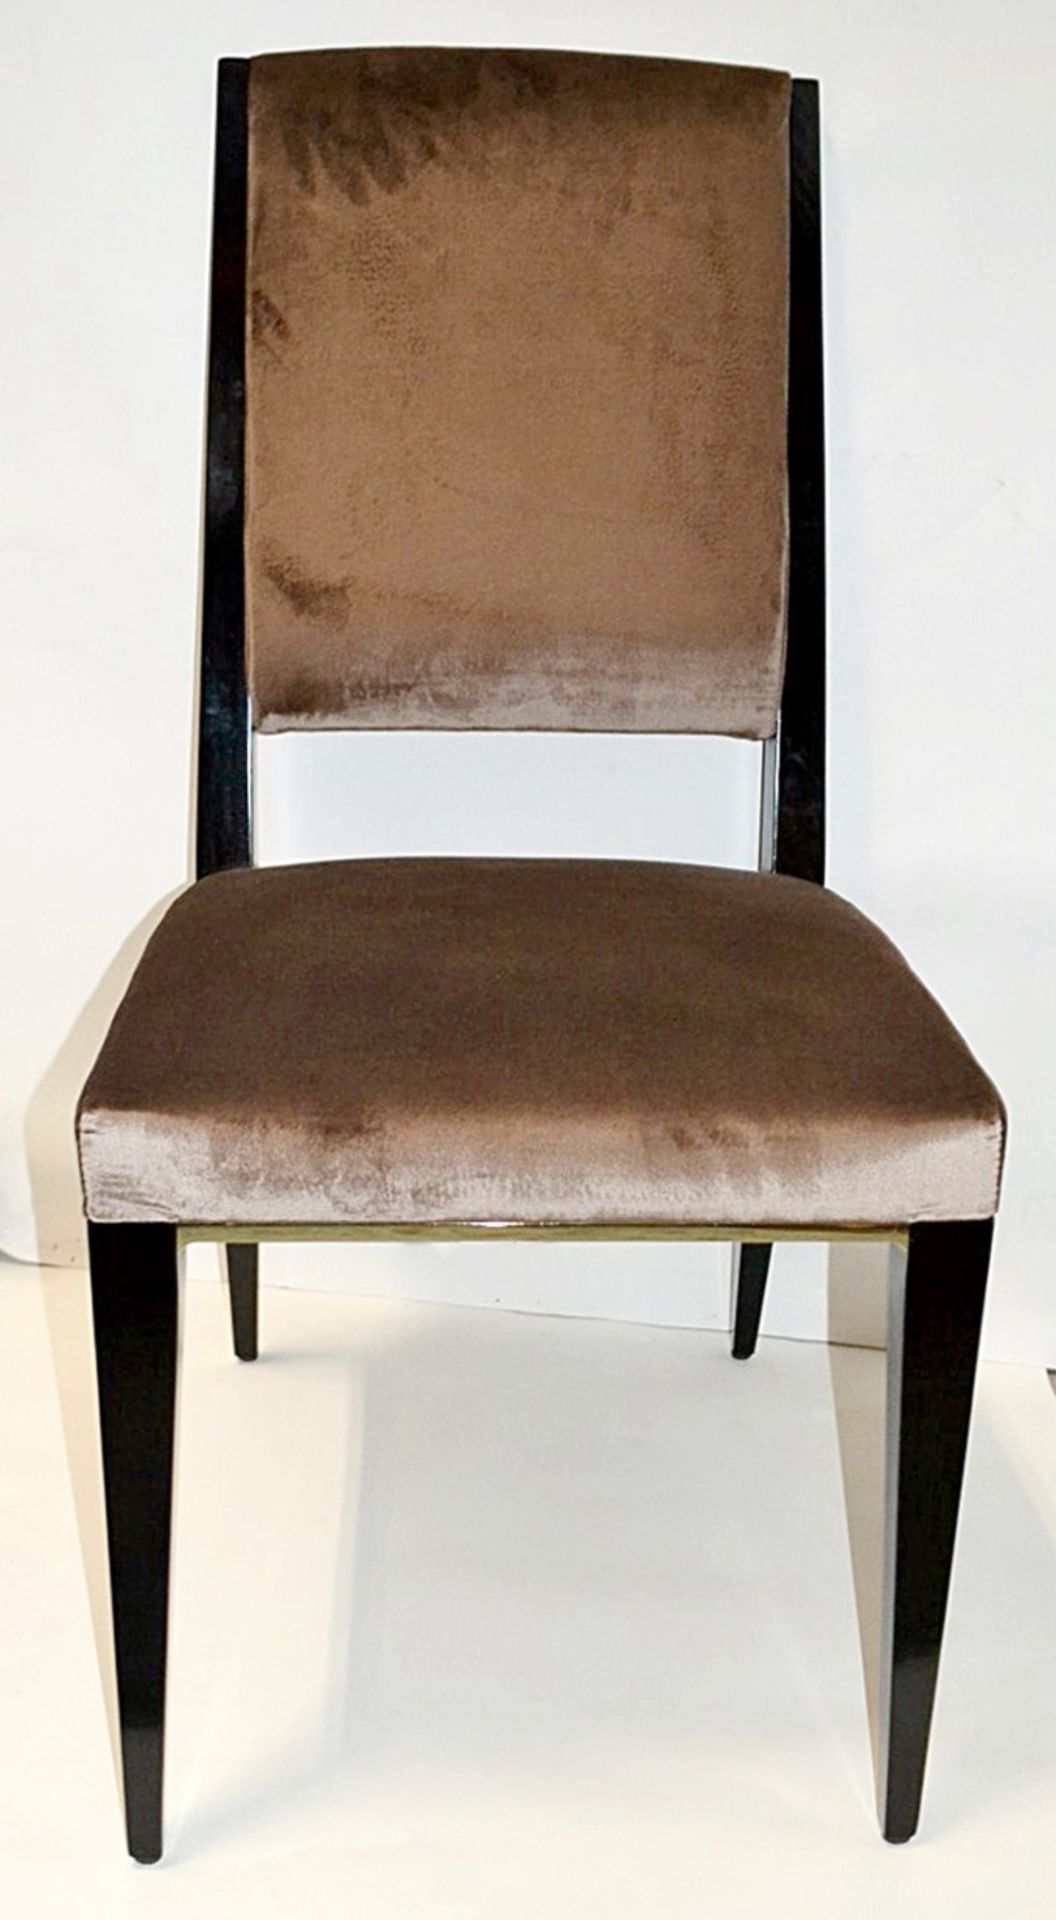 6 x FENDI Stardust Chairs (Art. Ss14/2) - Upholstered In A Rich Mocha Chenille With Brass - Image 3 of 7